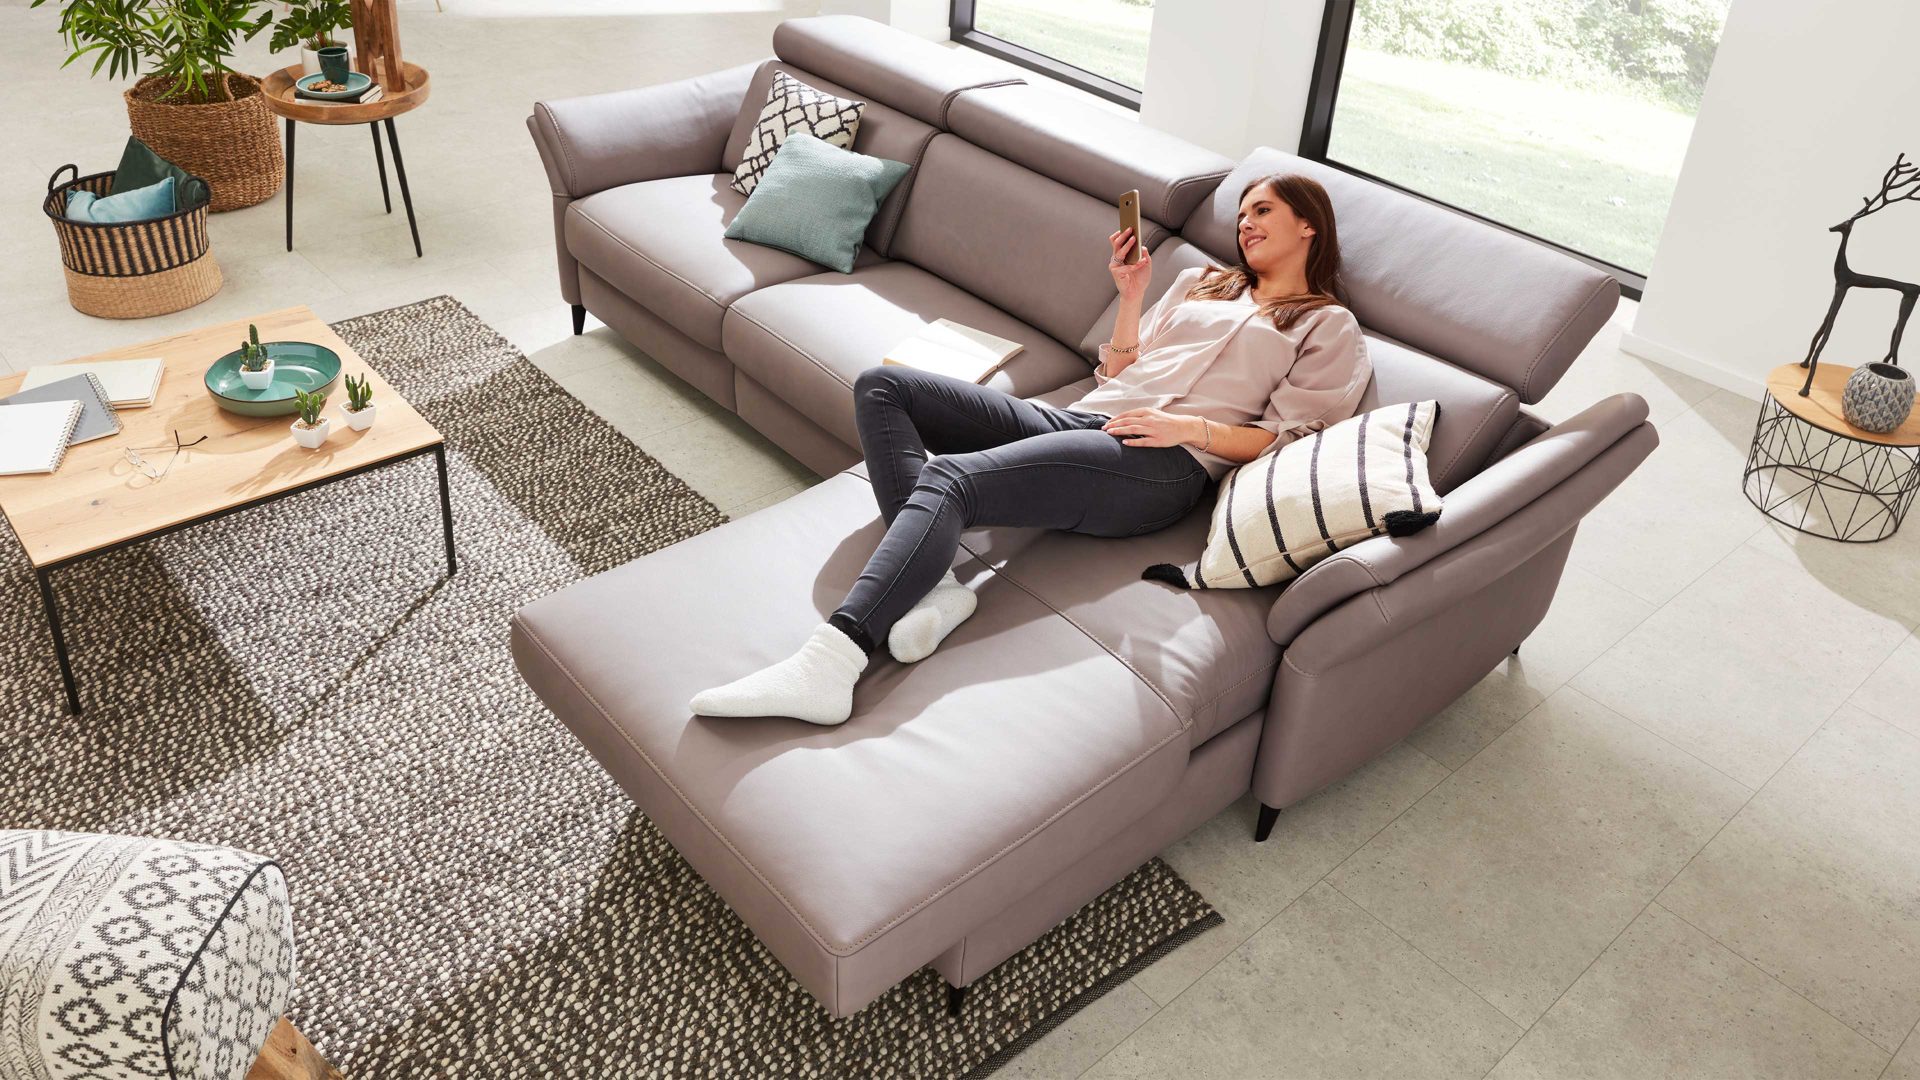 Interliving Sofa Serie 4055 - Relaxfunktion MoLi, einmotorige Relaxfunktion